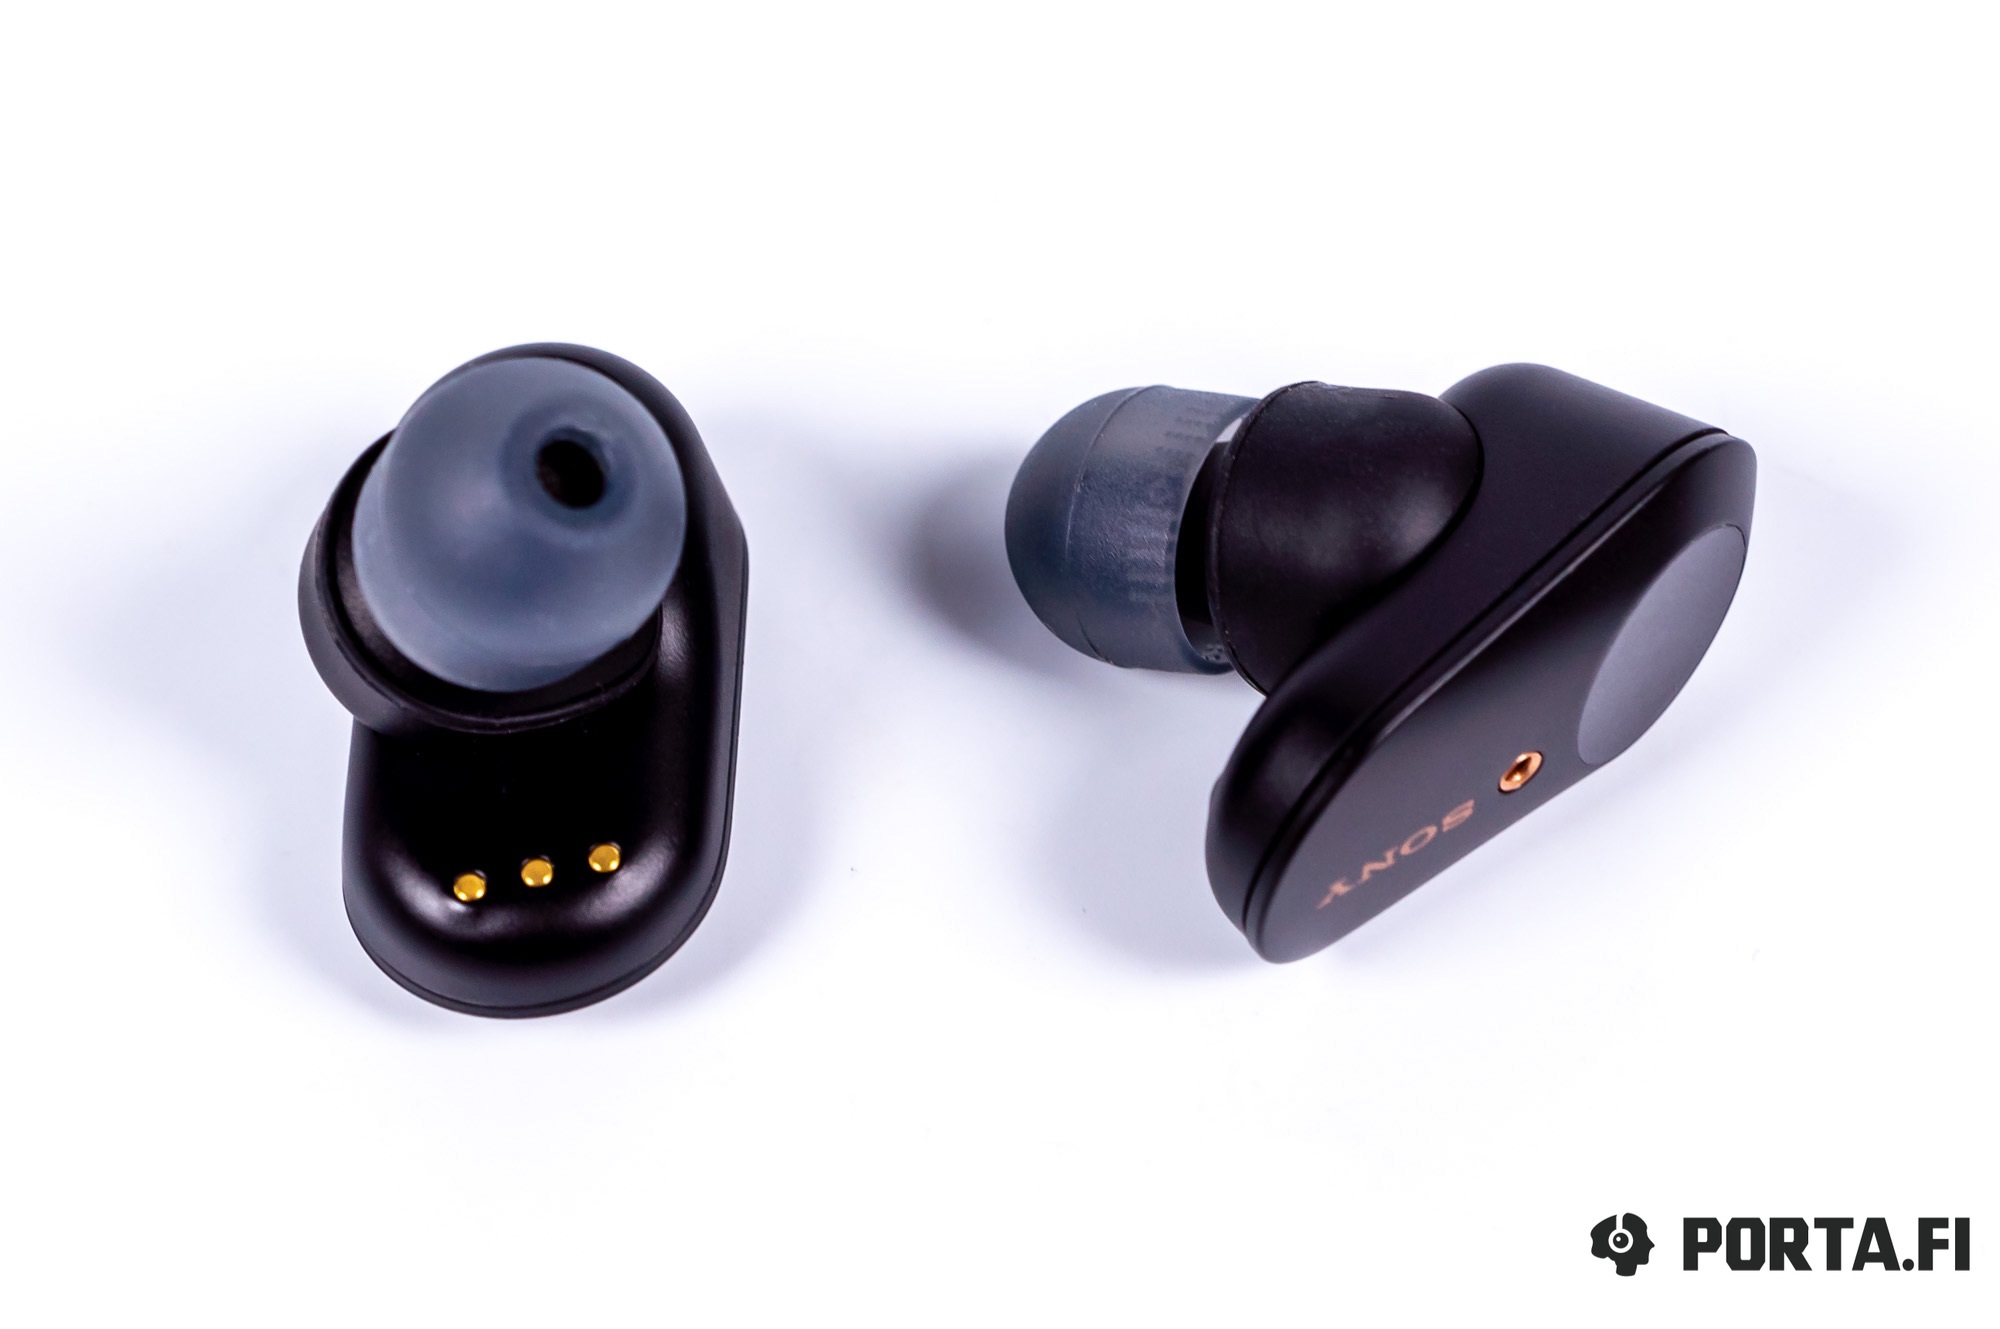 Sony WF-1000XM4 Review: The Audiophile's Perspective – In-Ear Fidelity